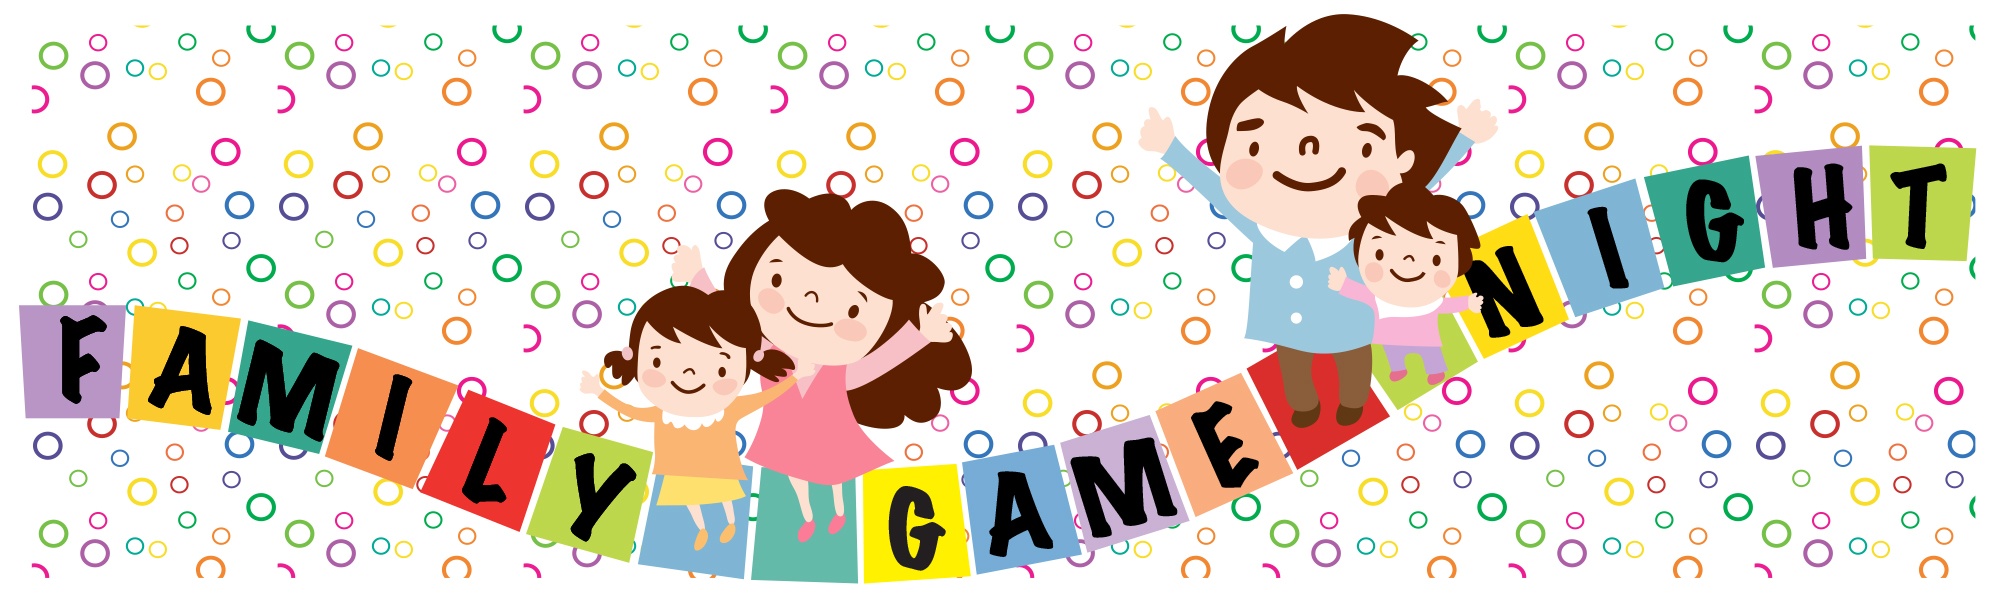 clipart game night - photo #44